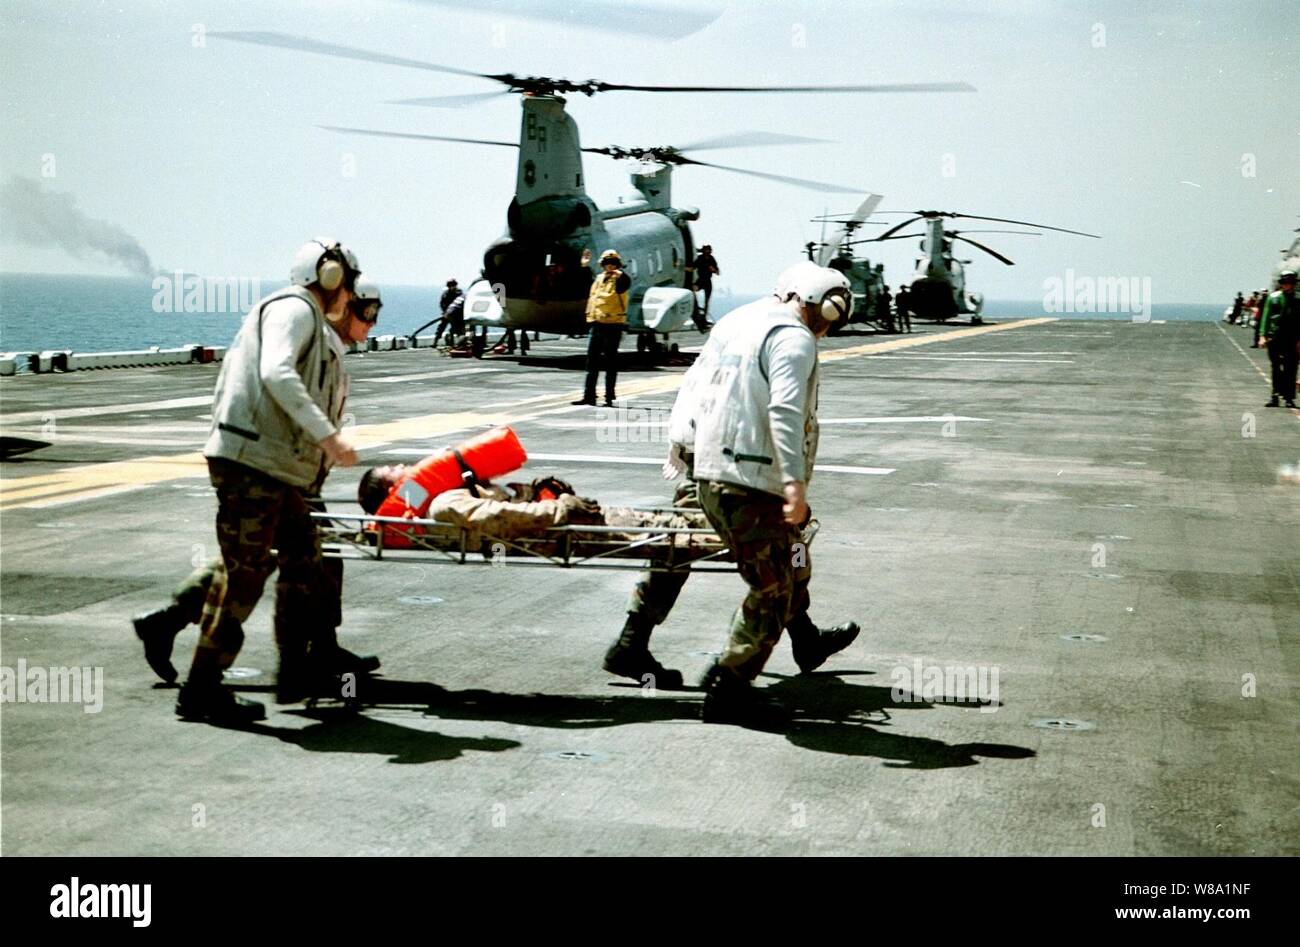 U.S. Marines from the Combat Cargo Platoon rush an injured sailor from the merchant vessel Seal-Land Mariner, seen ablaze in the background, to the medical department aboard the U.S. Navy amphibious assault ship USS Wasp (LHD 1) in the Mediterranean Sea on April 18, 1998.  Search and rescue crew members, helicopters and an 18-person fire-fighting team from the Wasp responded to an emergency distress call from the merchant vessel in the Mediterranean Sea, approximately 85 miles west of Crete.  A U.S. Navy CH-46 Sea Knight helicopter air-lifted two of the merchant vessel crew members to the Wasp Stock Photo